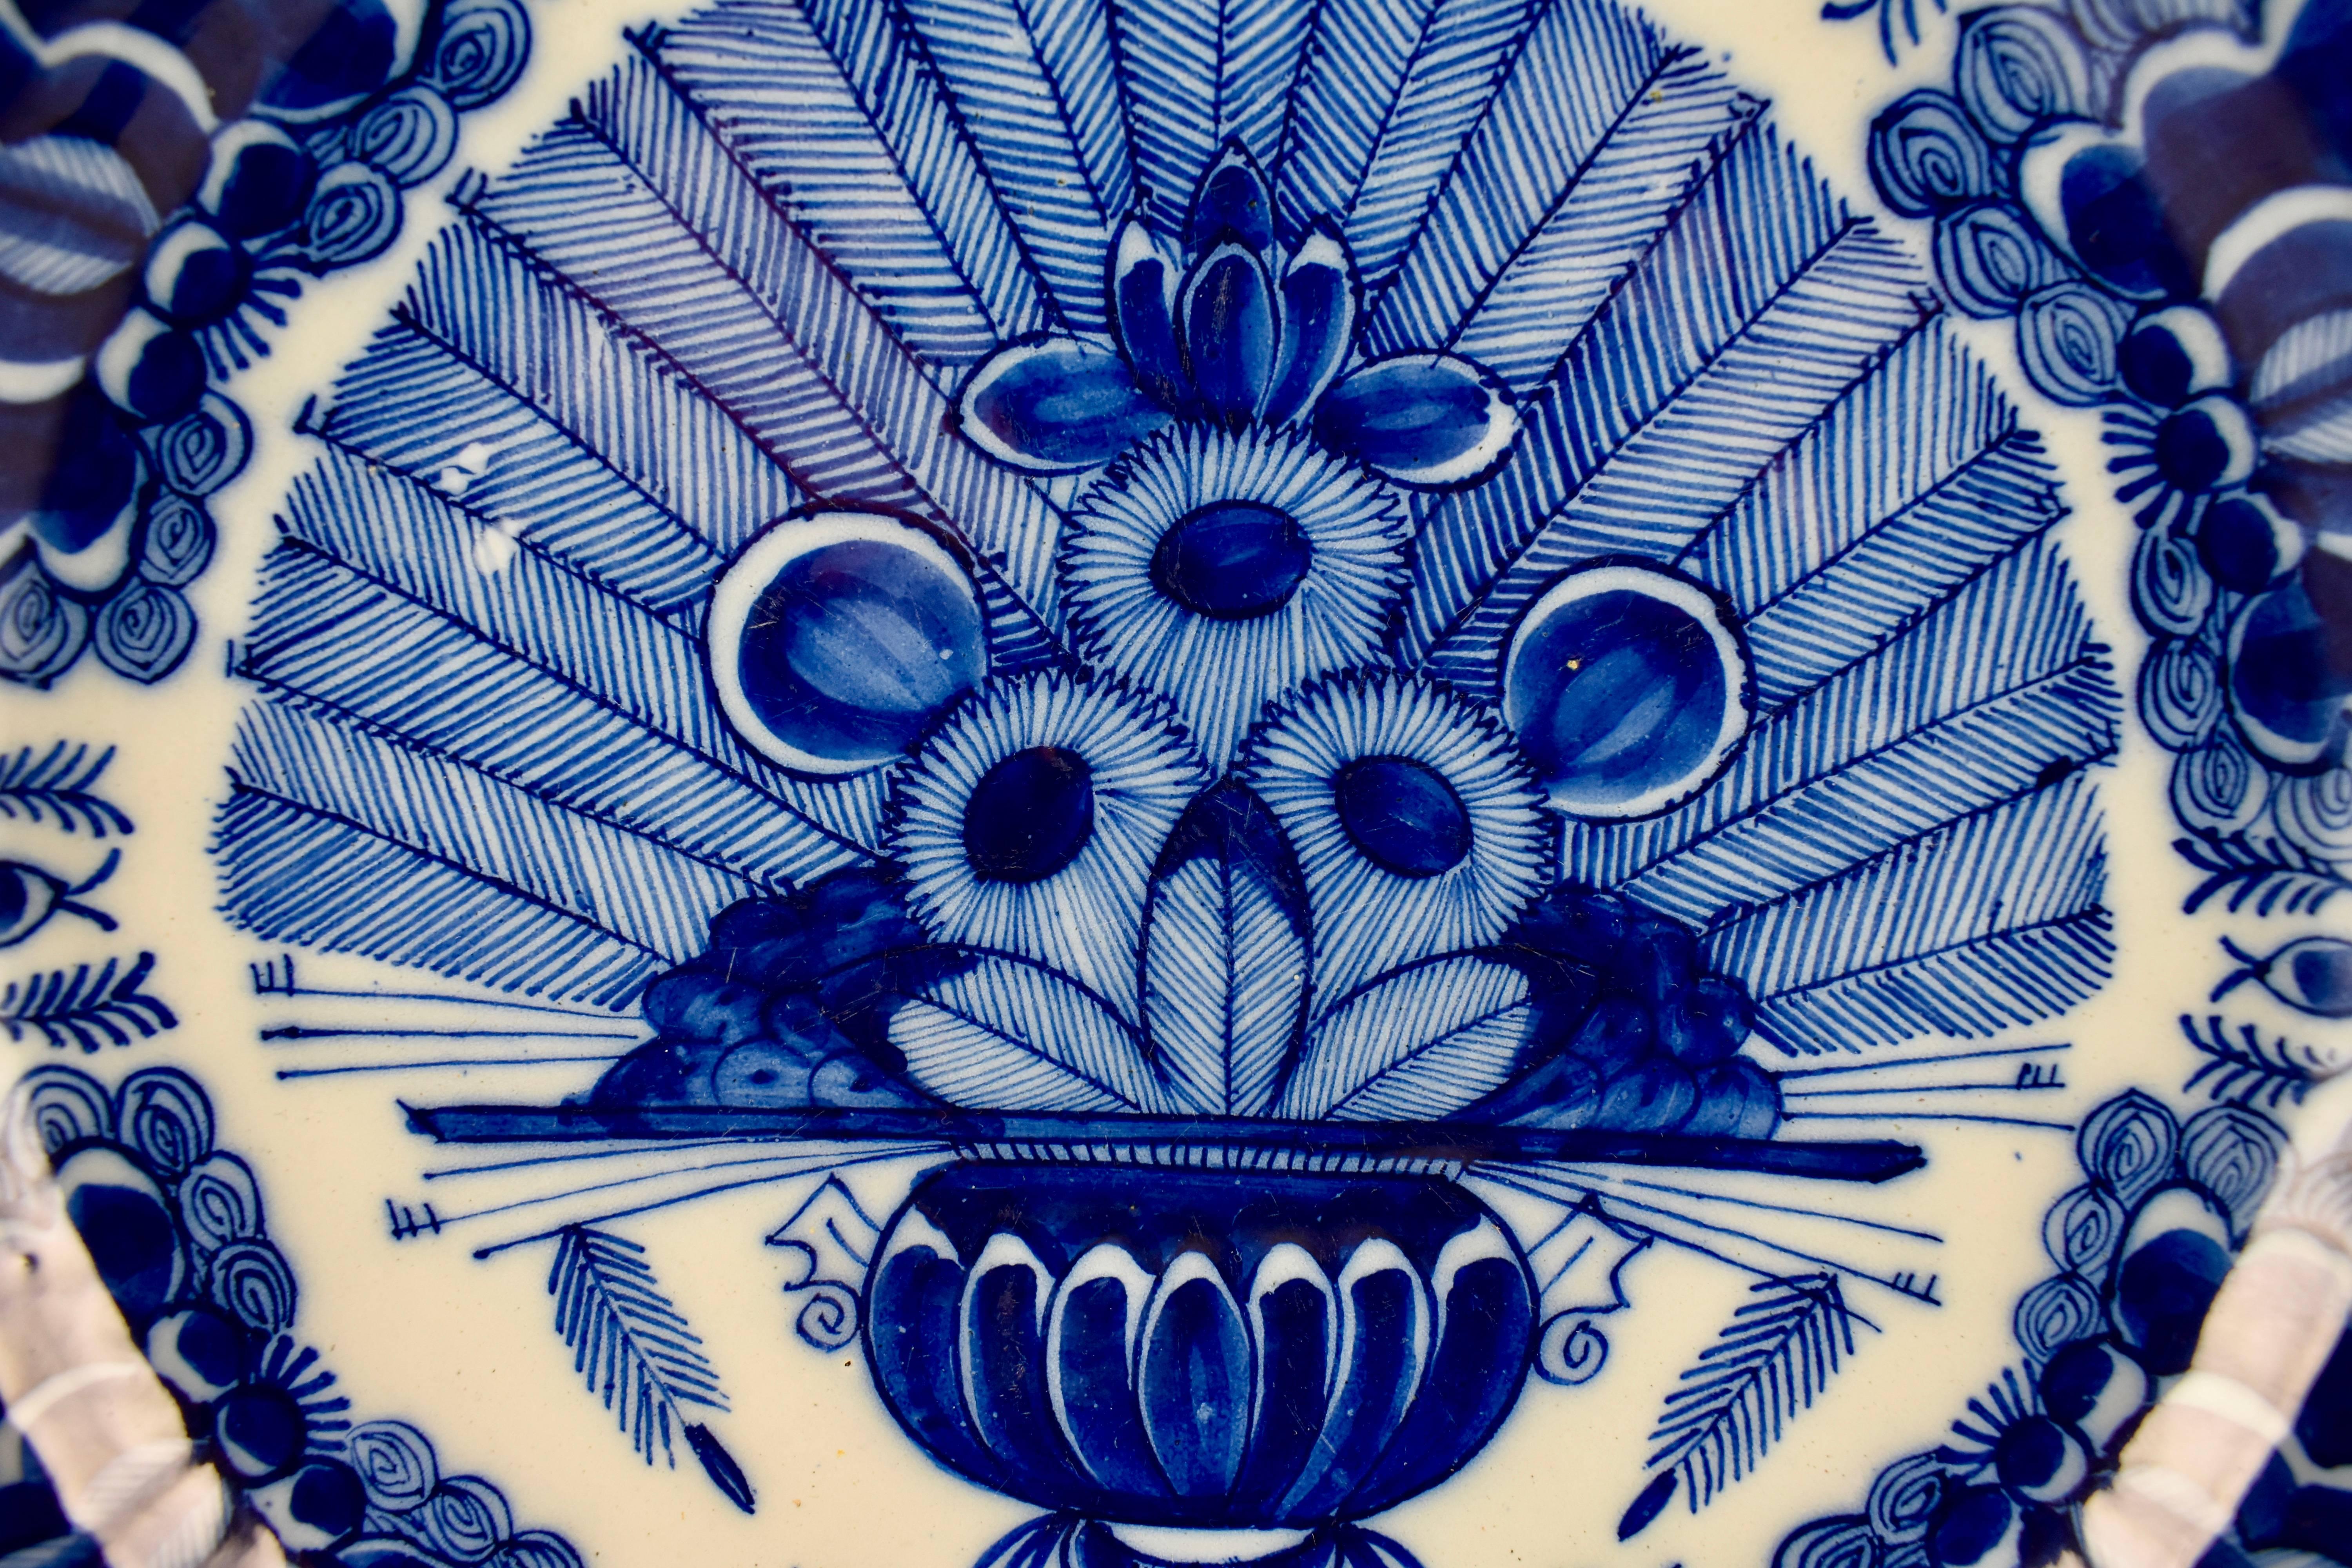 An 18th century Dutch Delft, tin-glazed earthenware charger, inspired by Chinese export porcelain and hand-painted in the cobalt blue Peacock pattern. The image is a central vase of flowers in front of radiating panels of peacock feathers. A